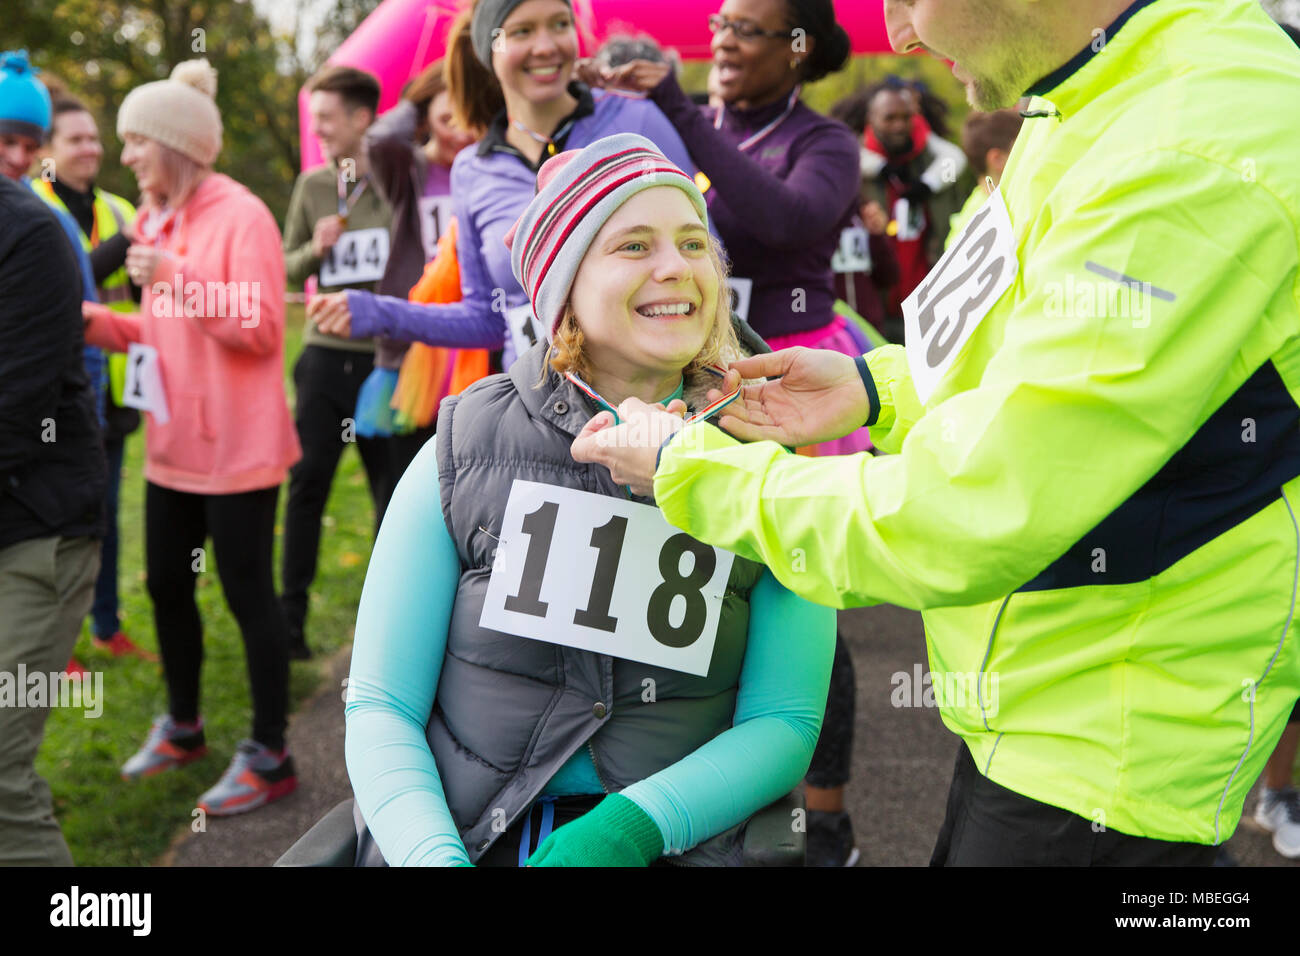 Man placing medal around neck of woman in wheelchair at charity race Stock Photo